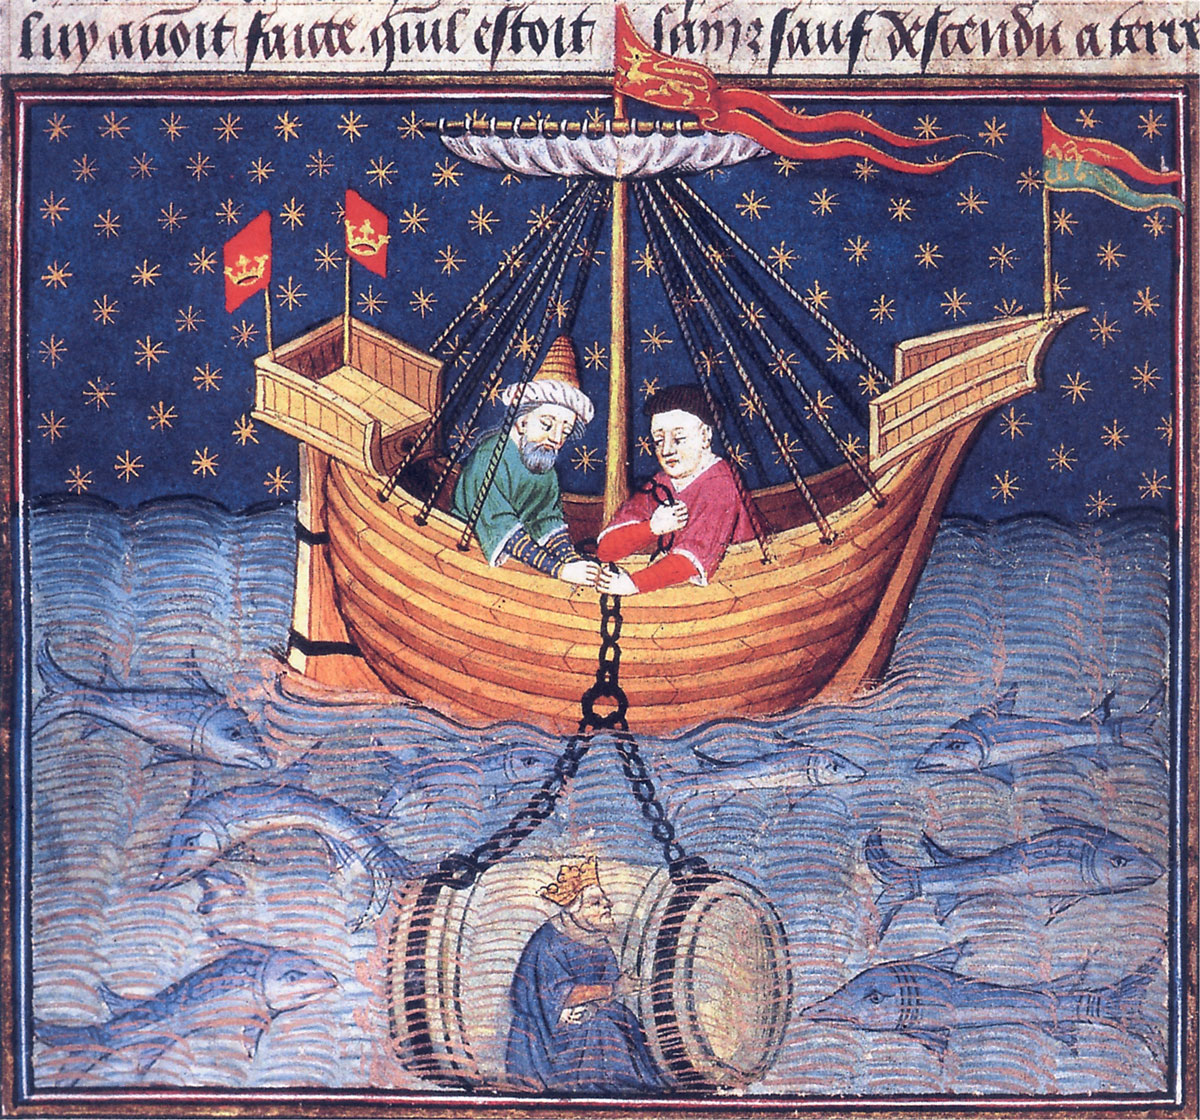 A page from a fifteenth-century illuminated manuscript that depicts Alexander the Great surveying the ocean while submerged in a glass diving bell.